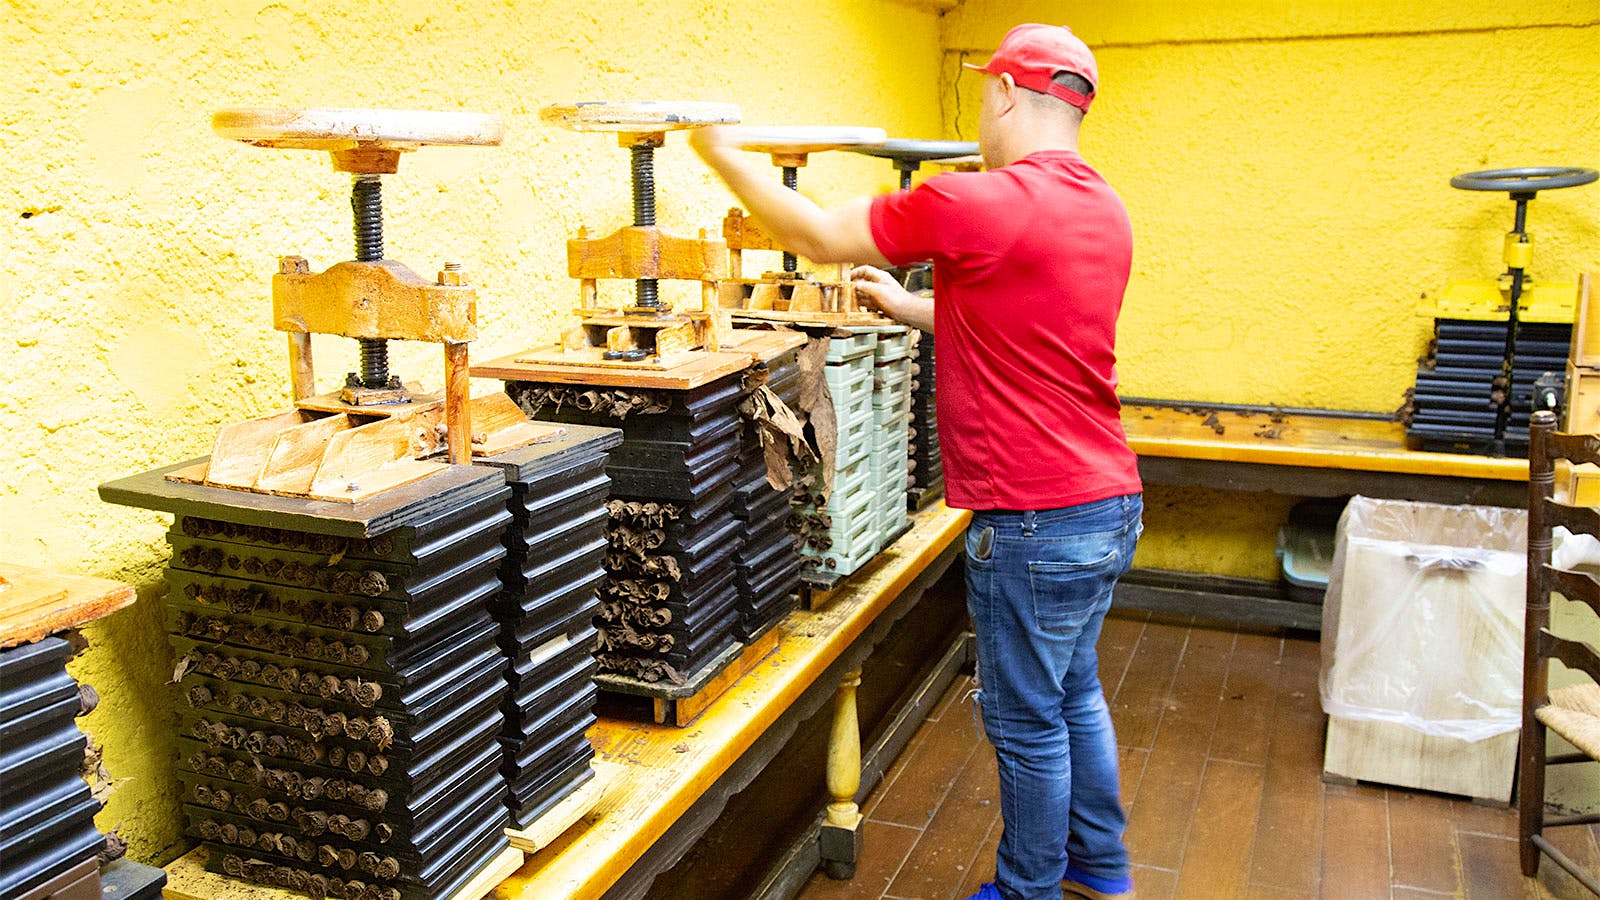 A factory worker loosening a vice before rotating the cigars inside the molds that are being compressed.